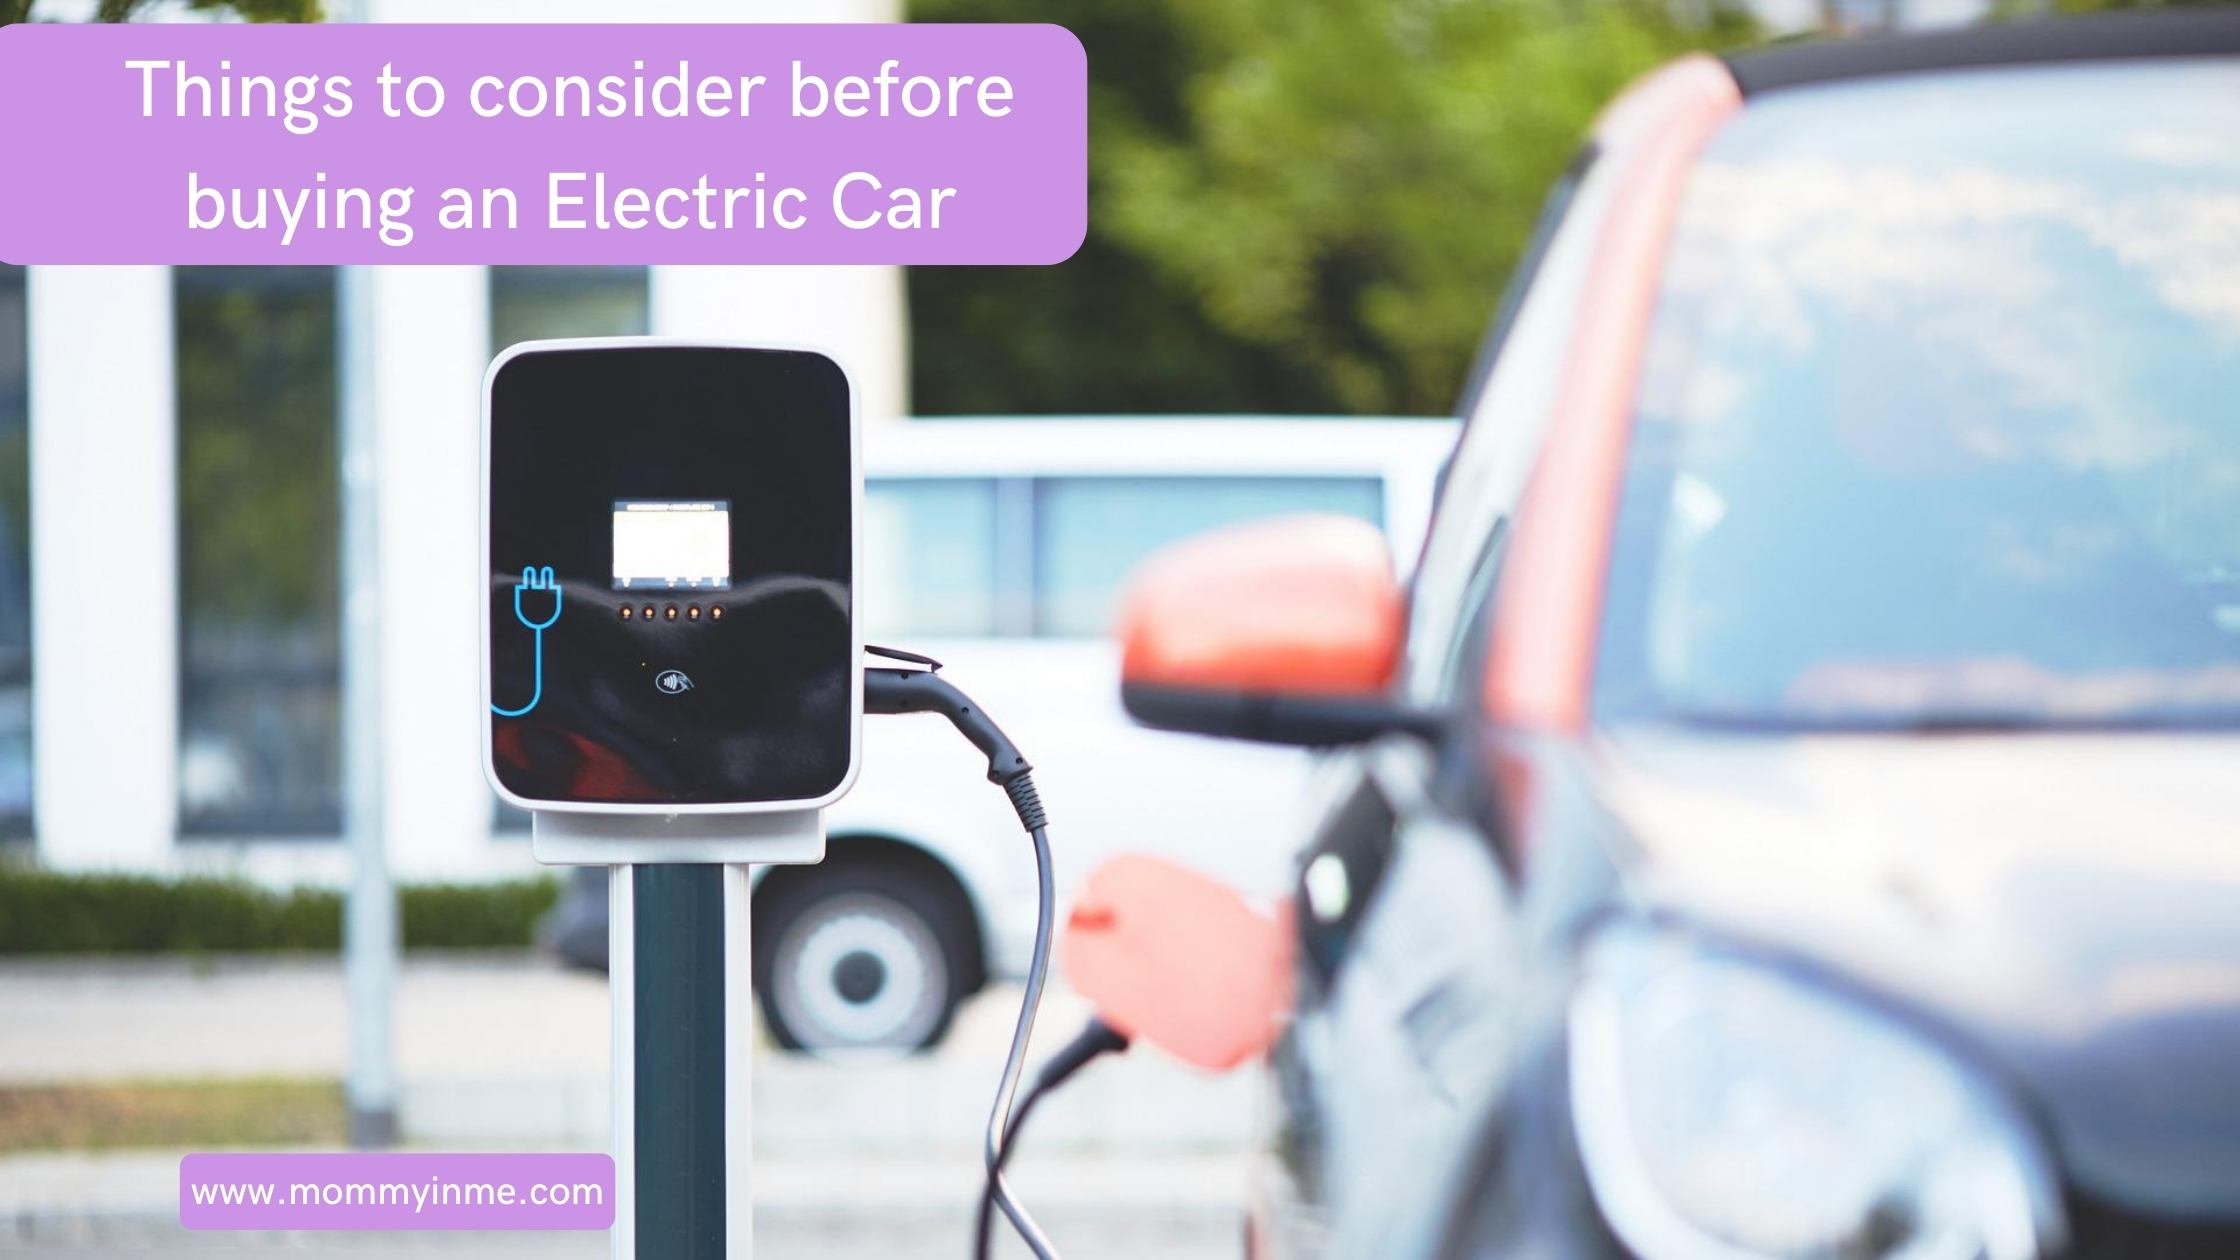 Things to consider before buying an Electric Car